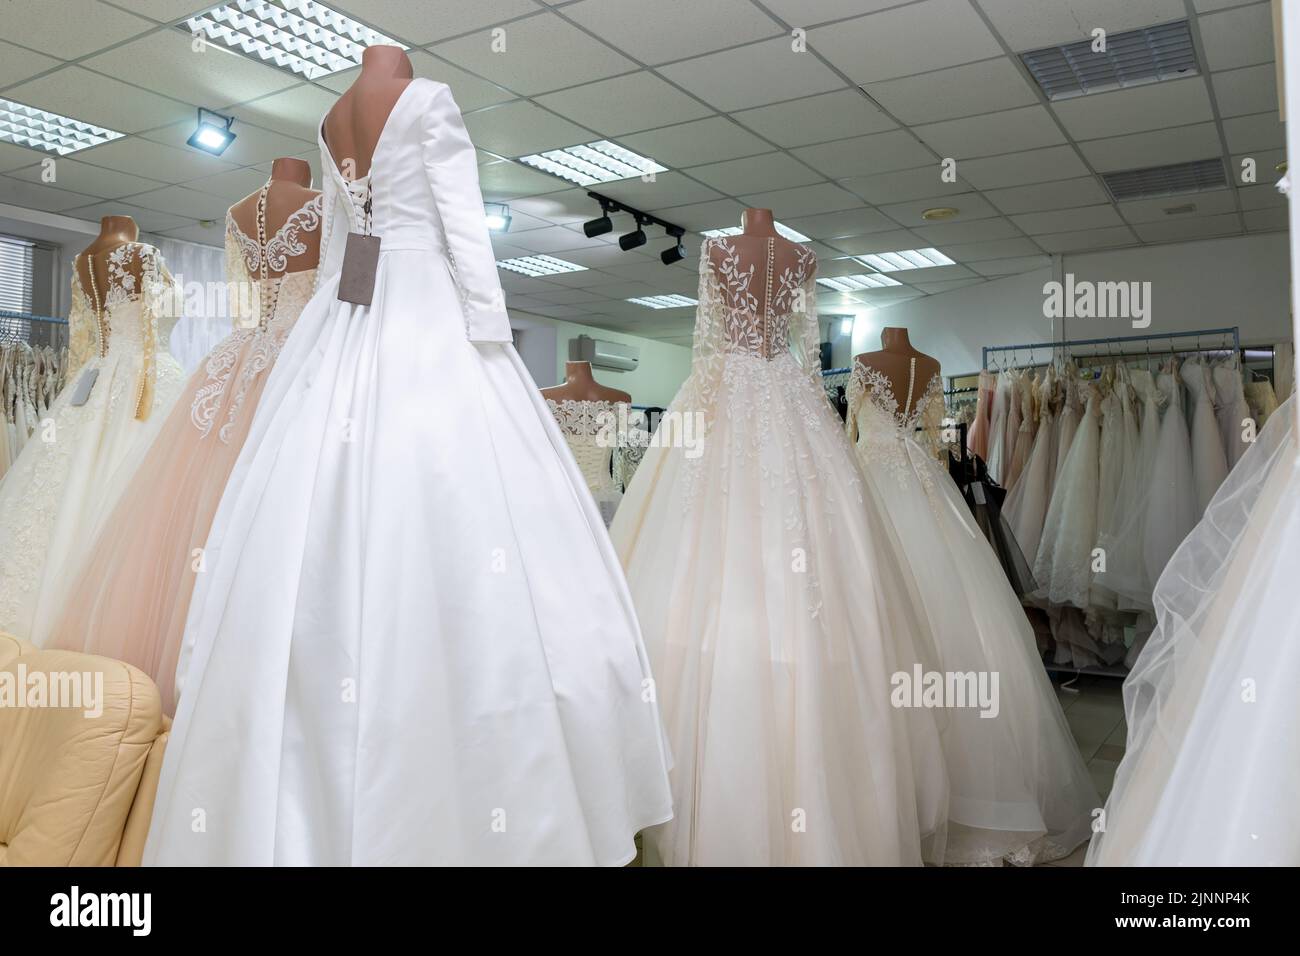 Several wedding dresses on mannequins in a wedding salon. Rear view Stock Photo